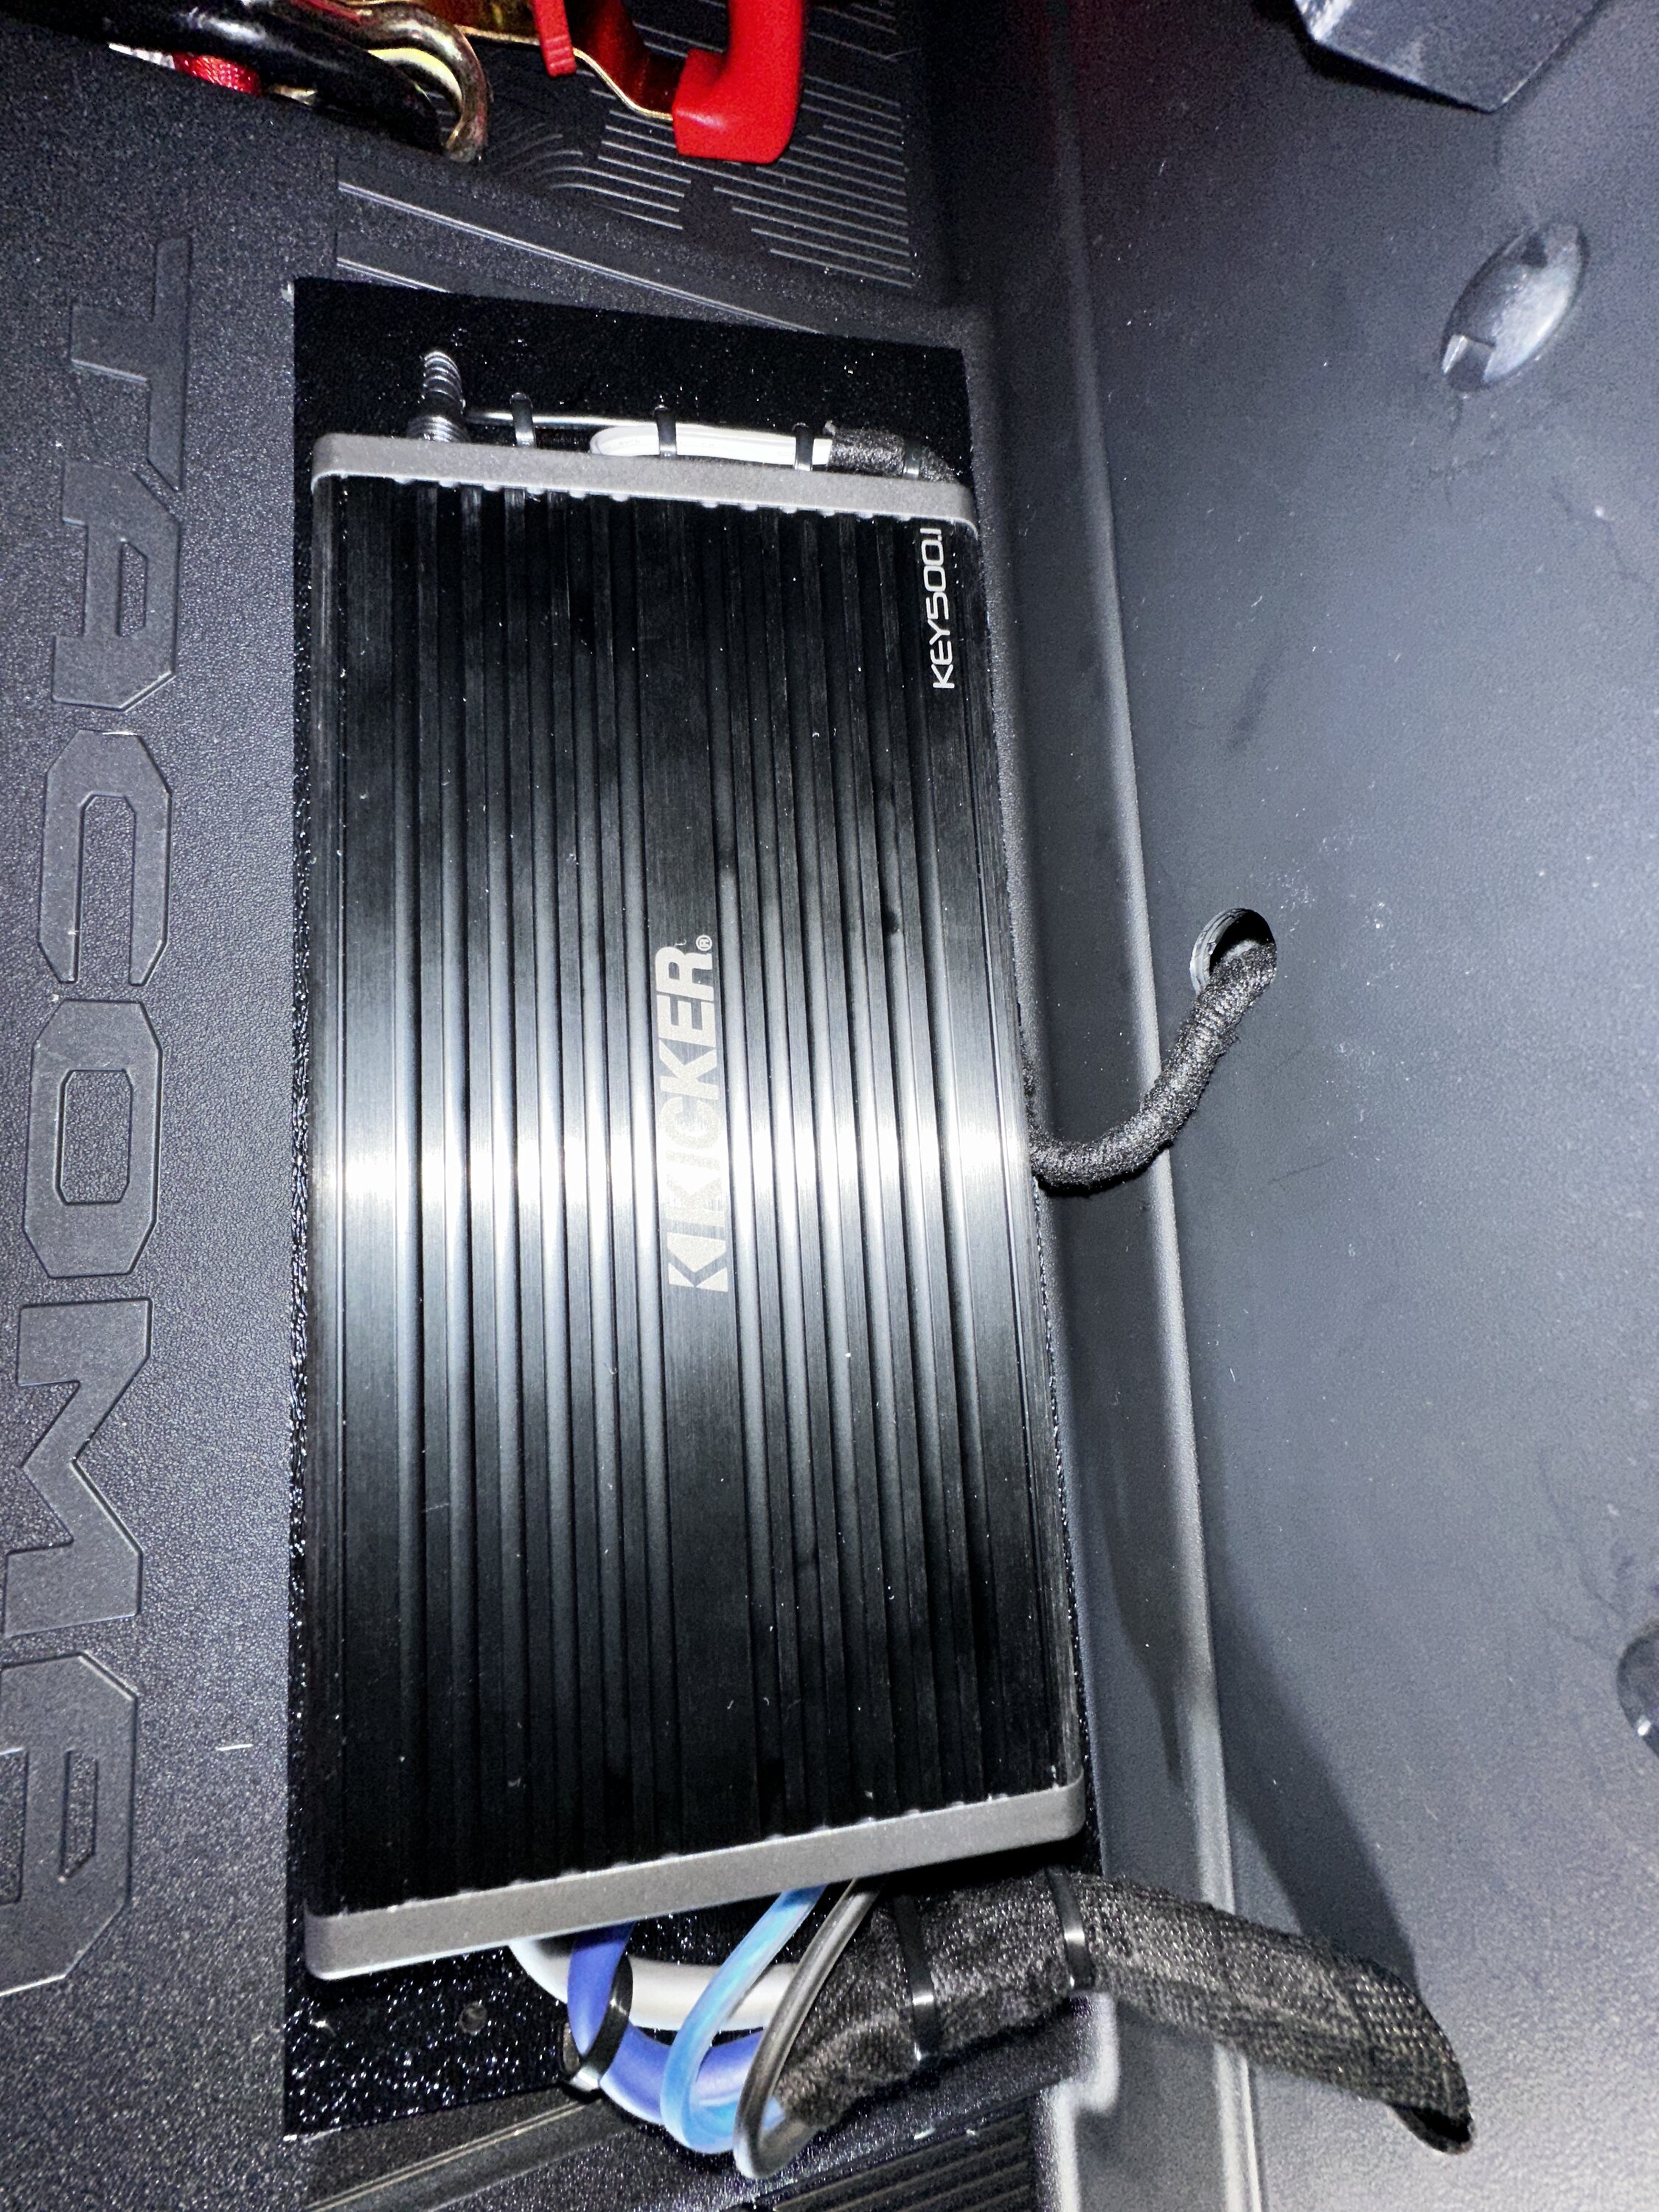 2024 Tacoma Aftermarket subwoofer upgrade for 2024 Tacoma TRD Off-Road -- Update: added amp (Kicker key500.1) to power factory subwoofer IMG_2846.JPG